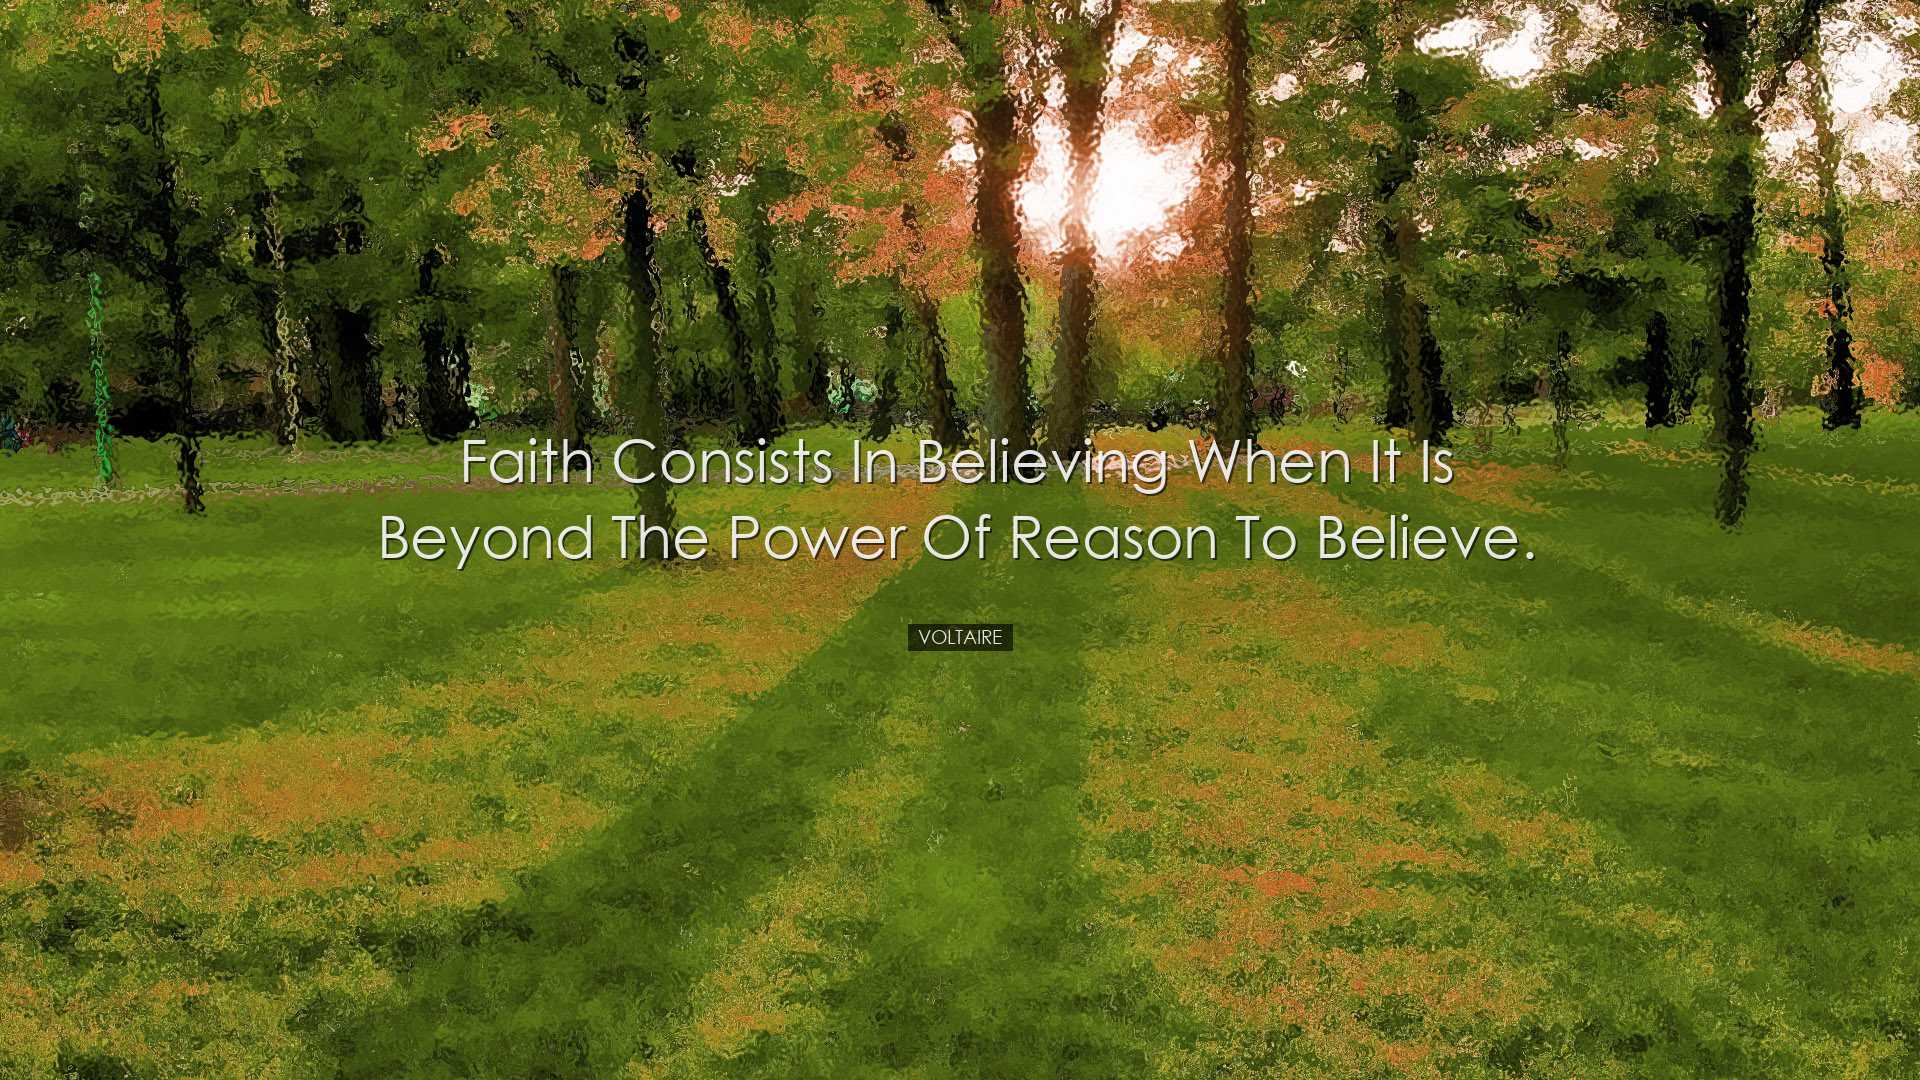 Faith consists in believing when it is beyond the power of reason